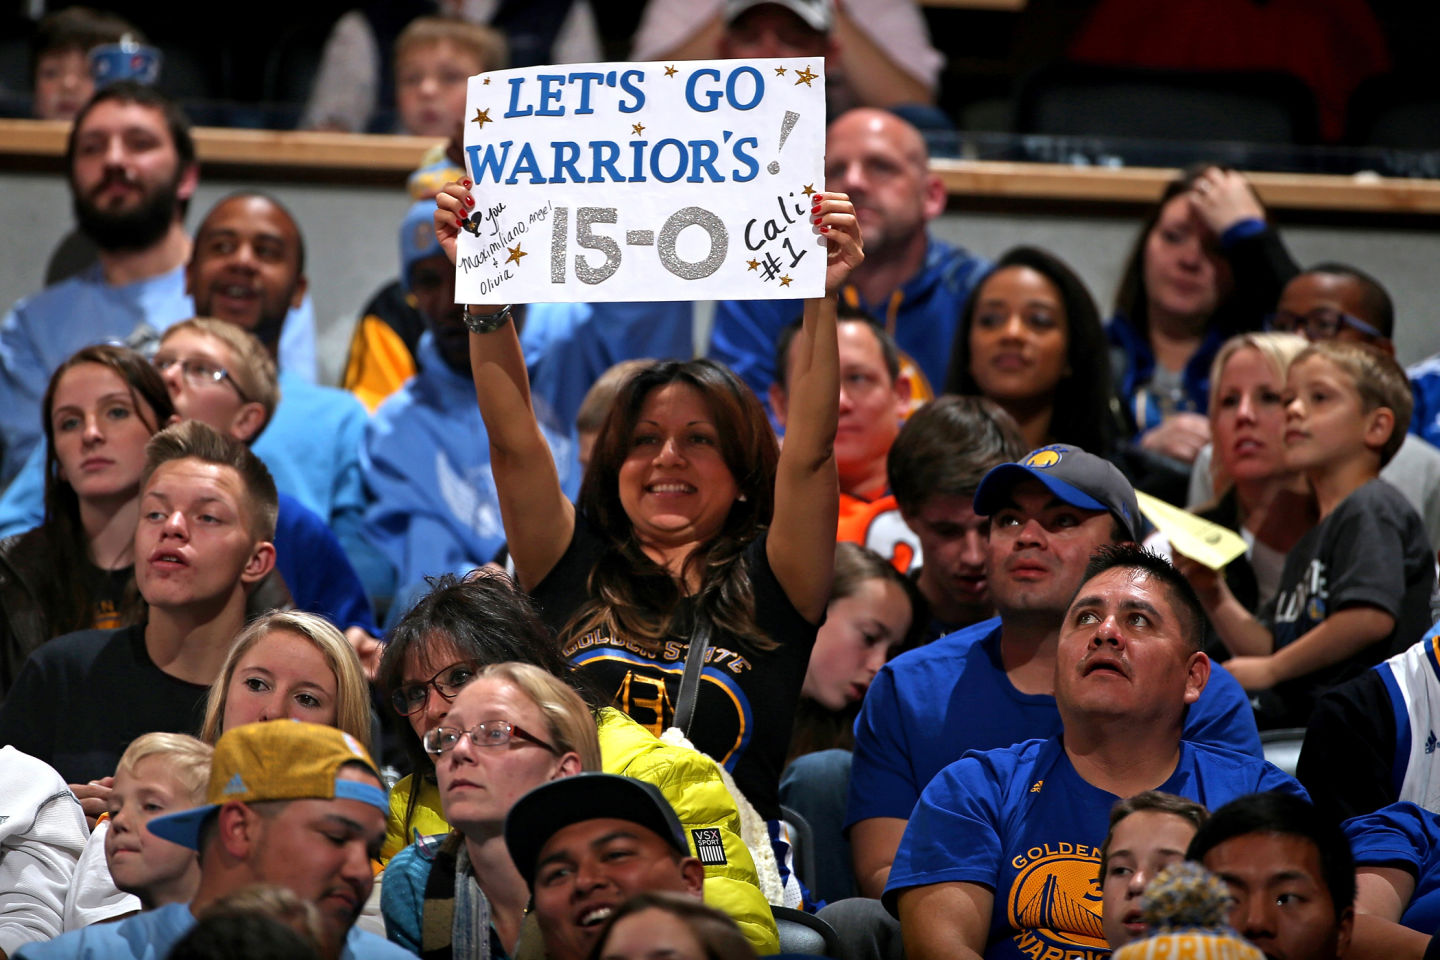 Fans celebrate the Golden State Warriors 15-0 season start with their 118-105 victory over the Denver Nuggets. (Doug Pensinger/Getty Images)